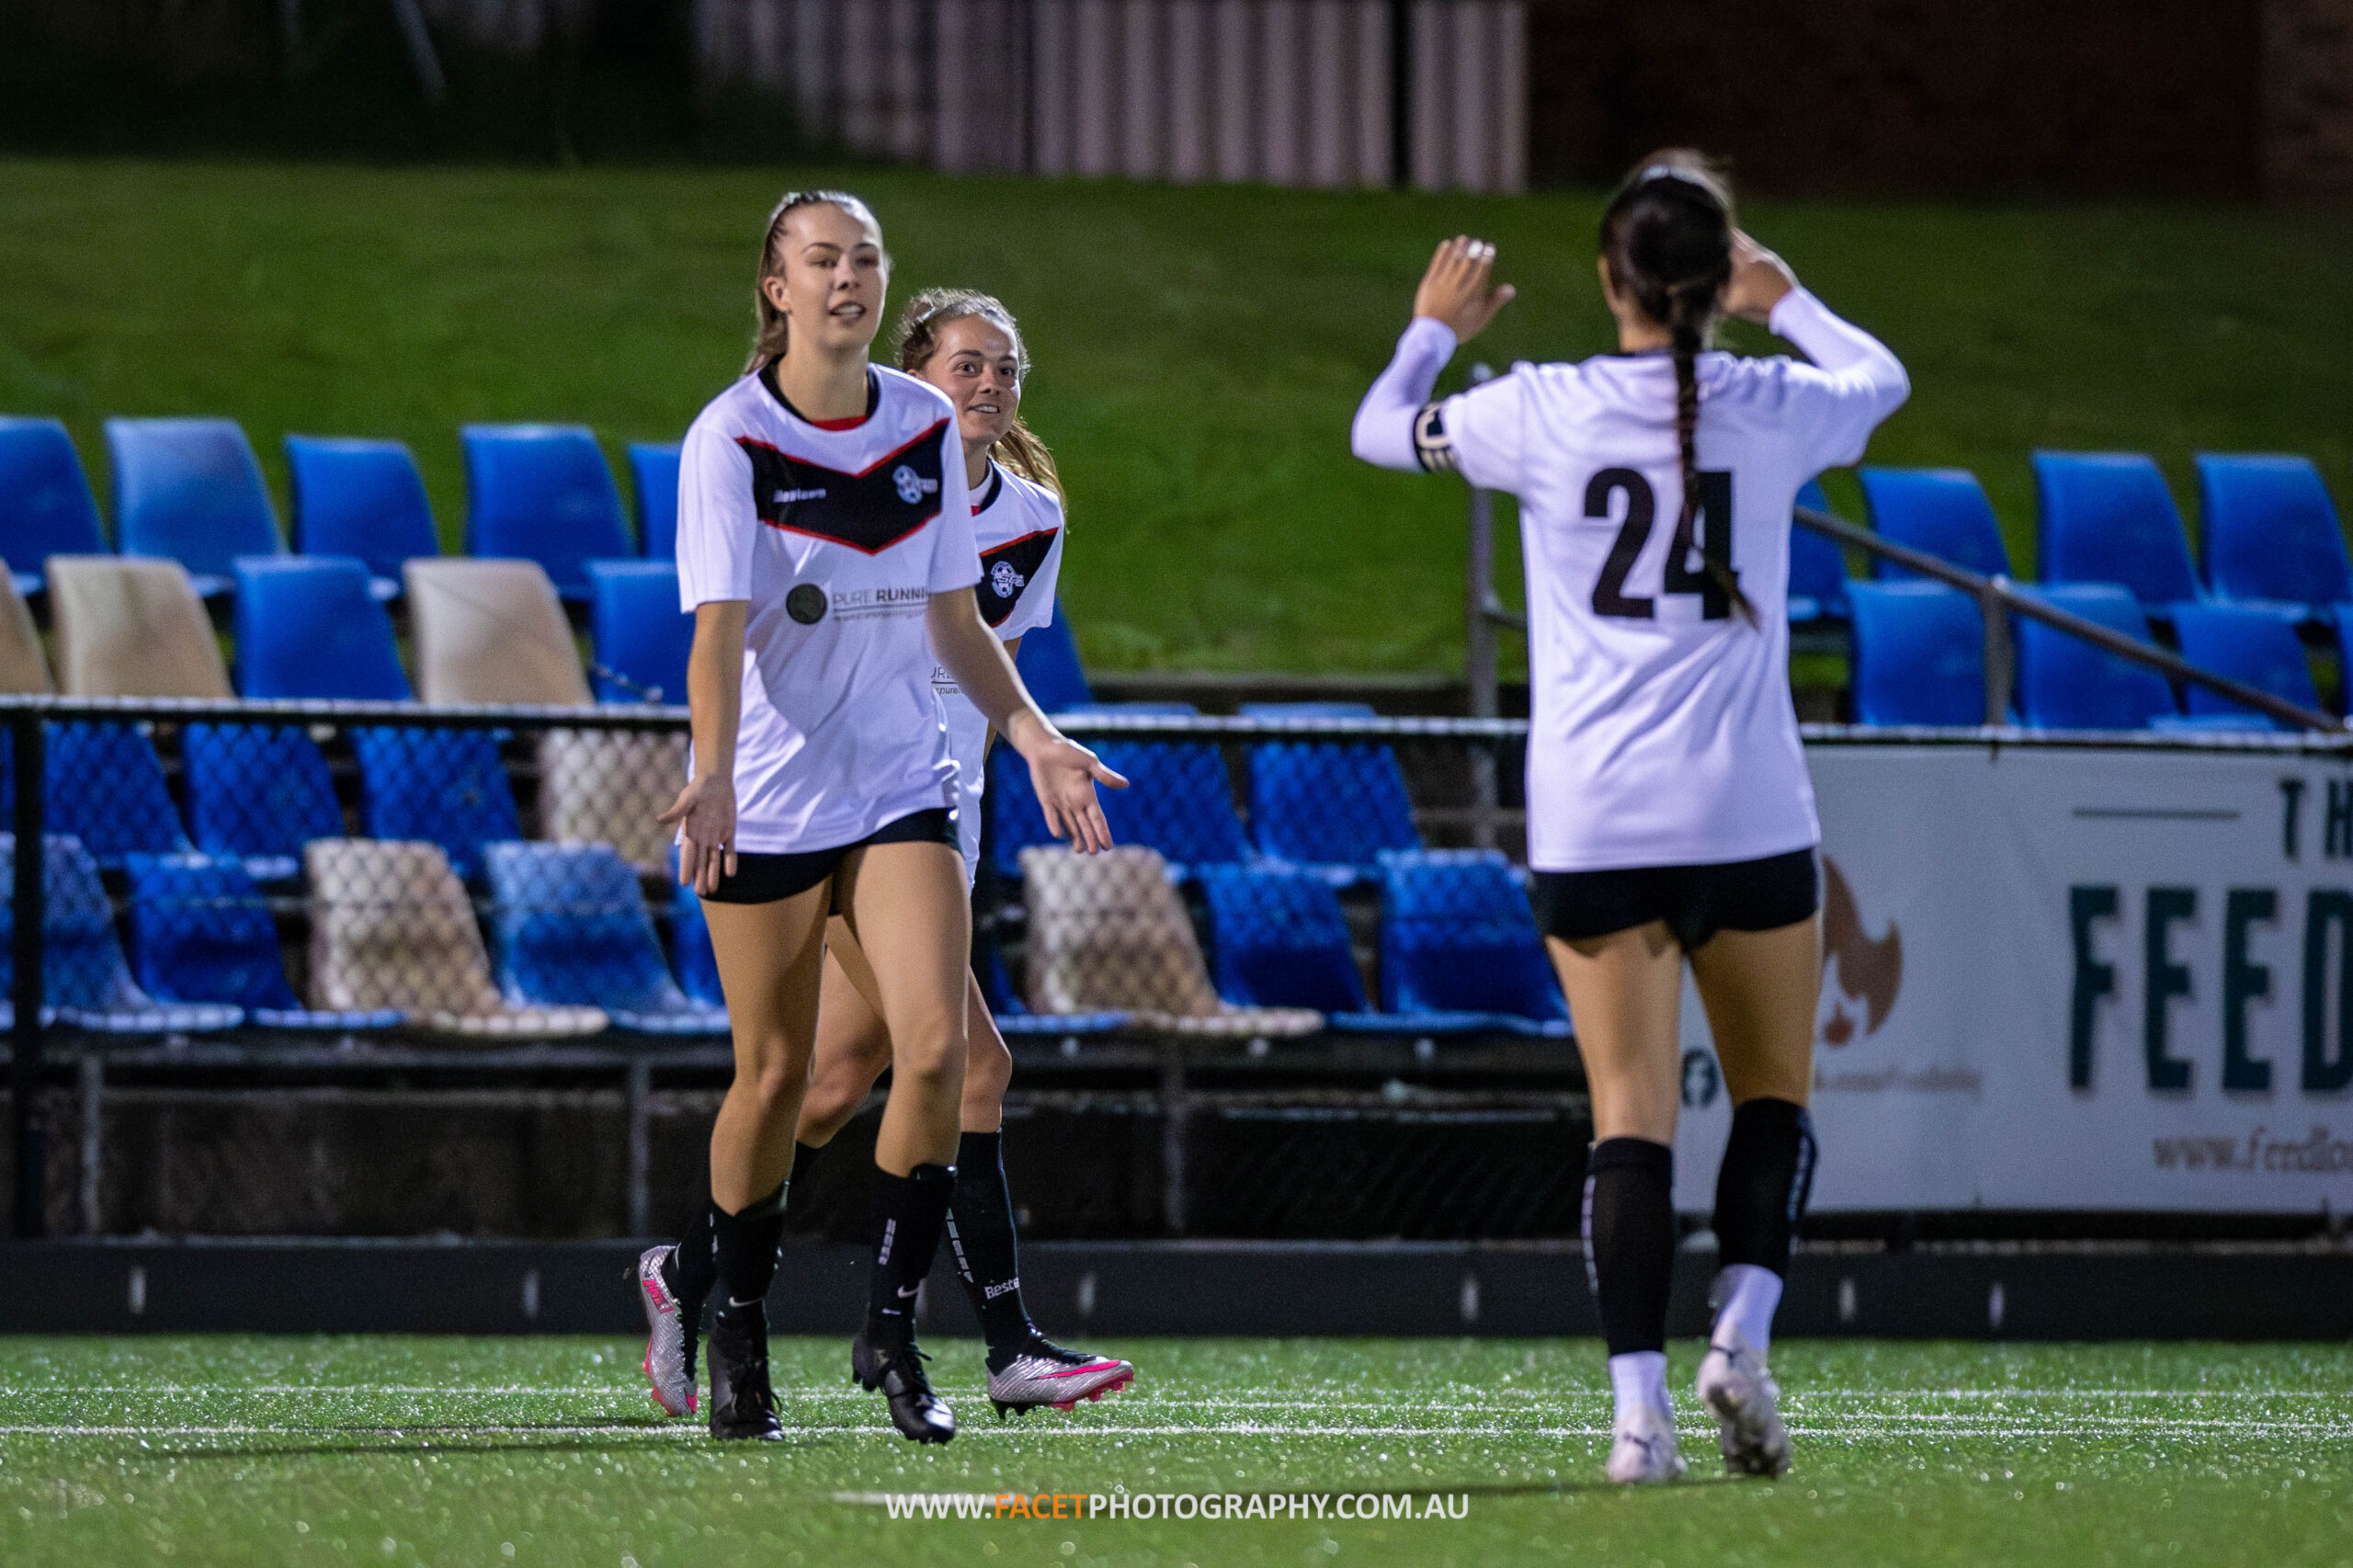 Women's Premier League Round 6: Seaforth celebrate a goal during their Sapphire Cup Round 2 game against Hurlstone Park Wanderers at Cromer Park. Photo credit: Jeremy Denham